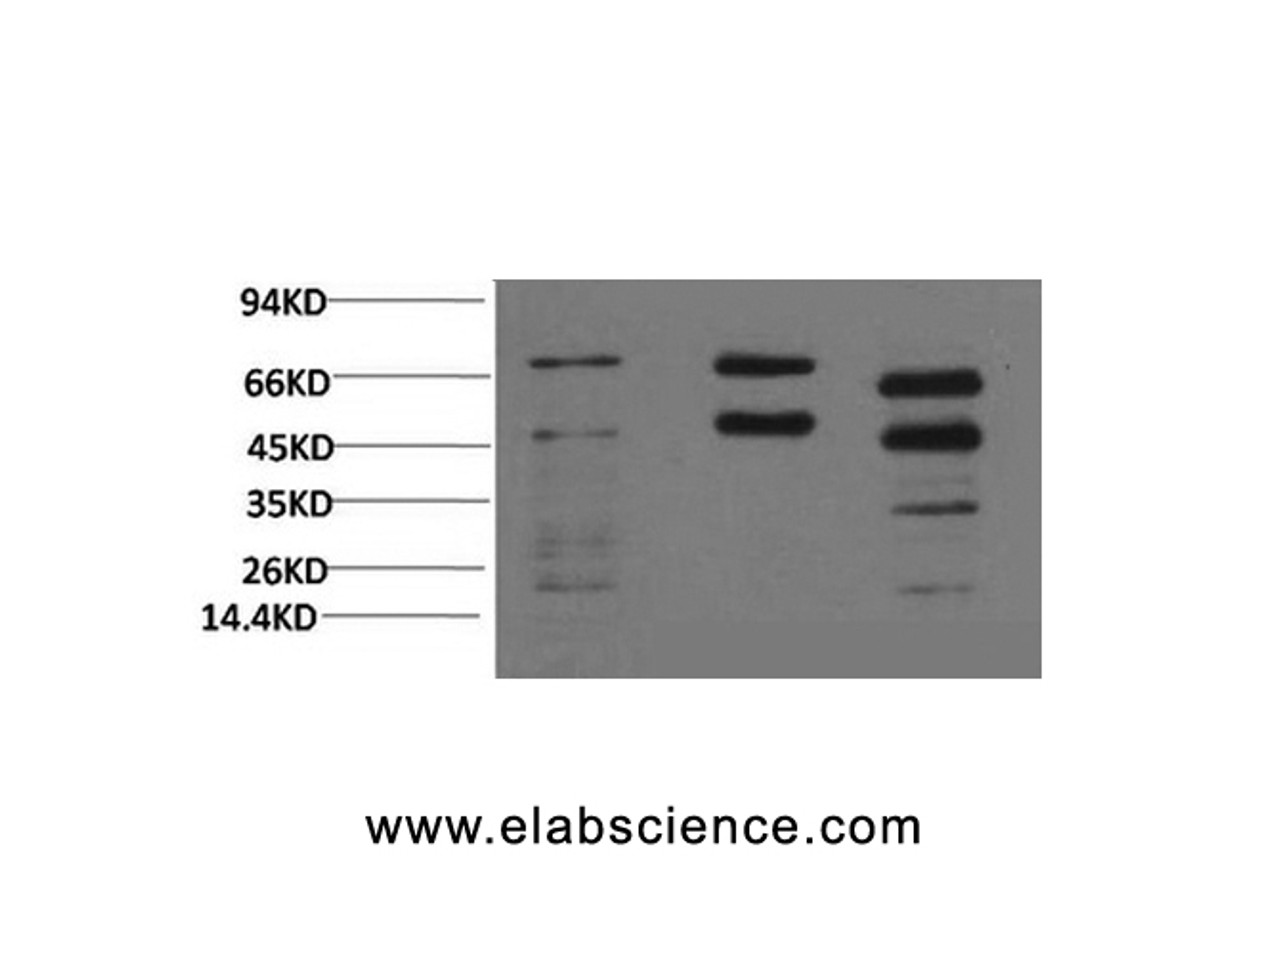 Western Blot analysis of 1) Hela, 2) Rat brain, 3) Mouse brain with Phosphoserine Monoclonal Antibody at dilution of 1:2000